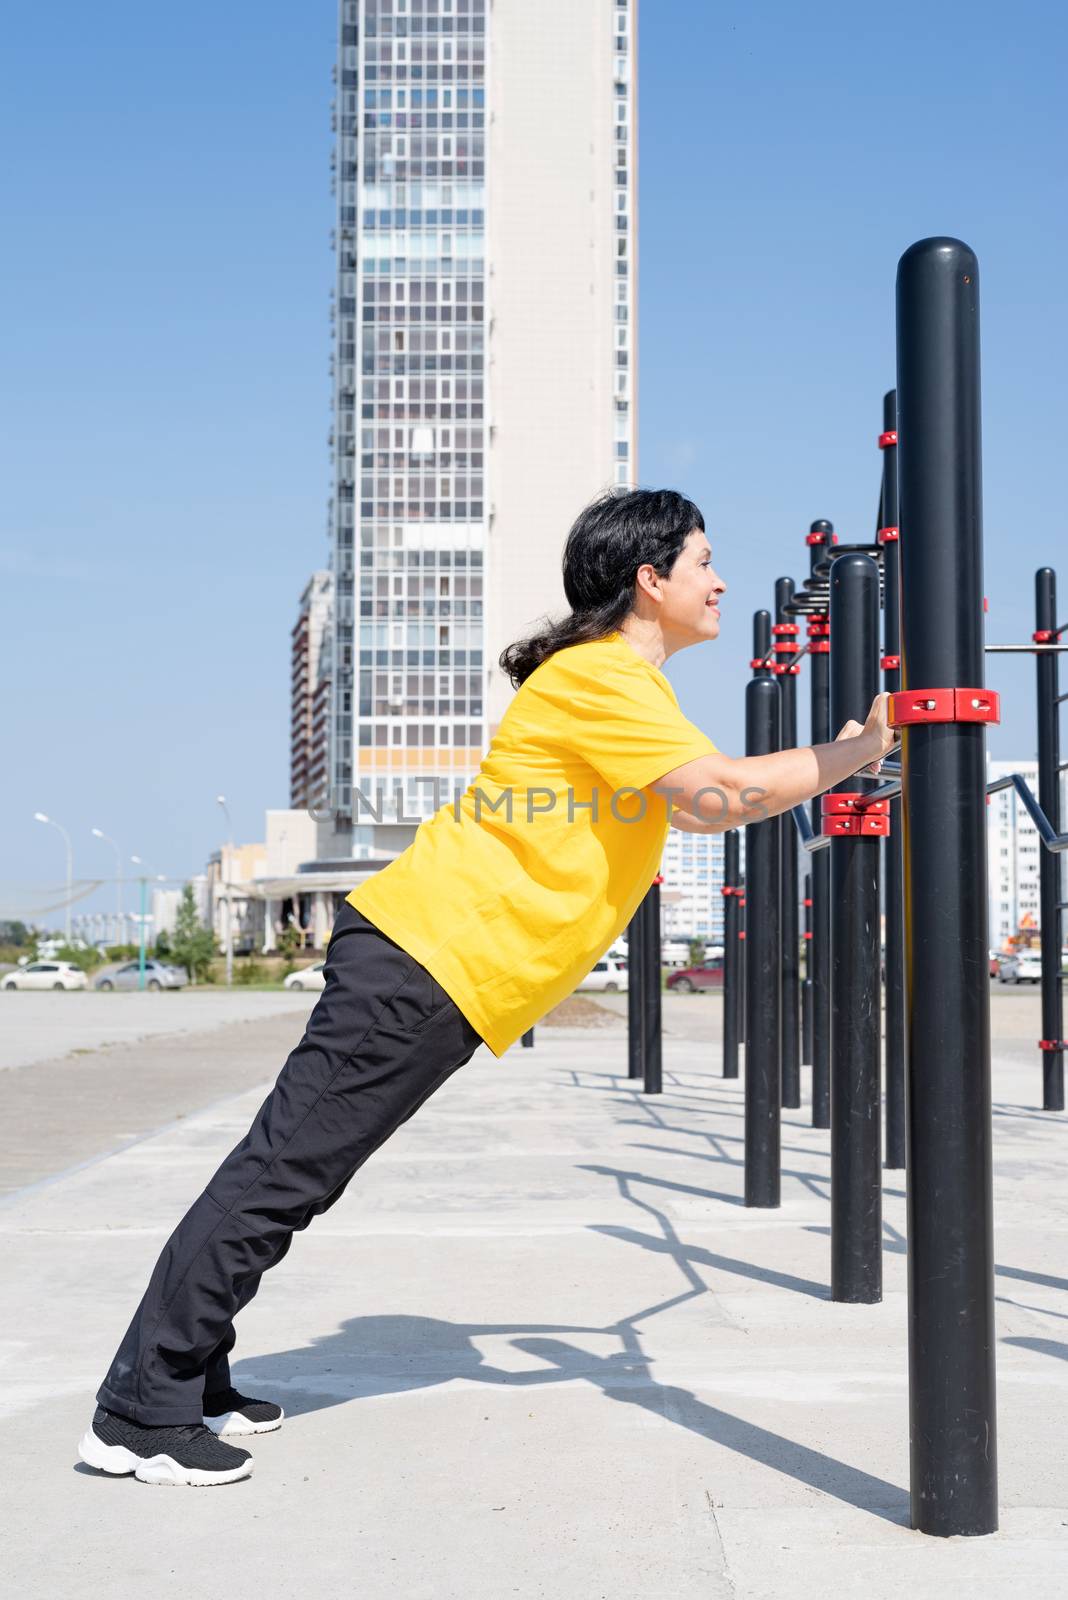 Smiling senior woman doing push ups outdoors on the sports ground bars by Desperada